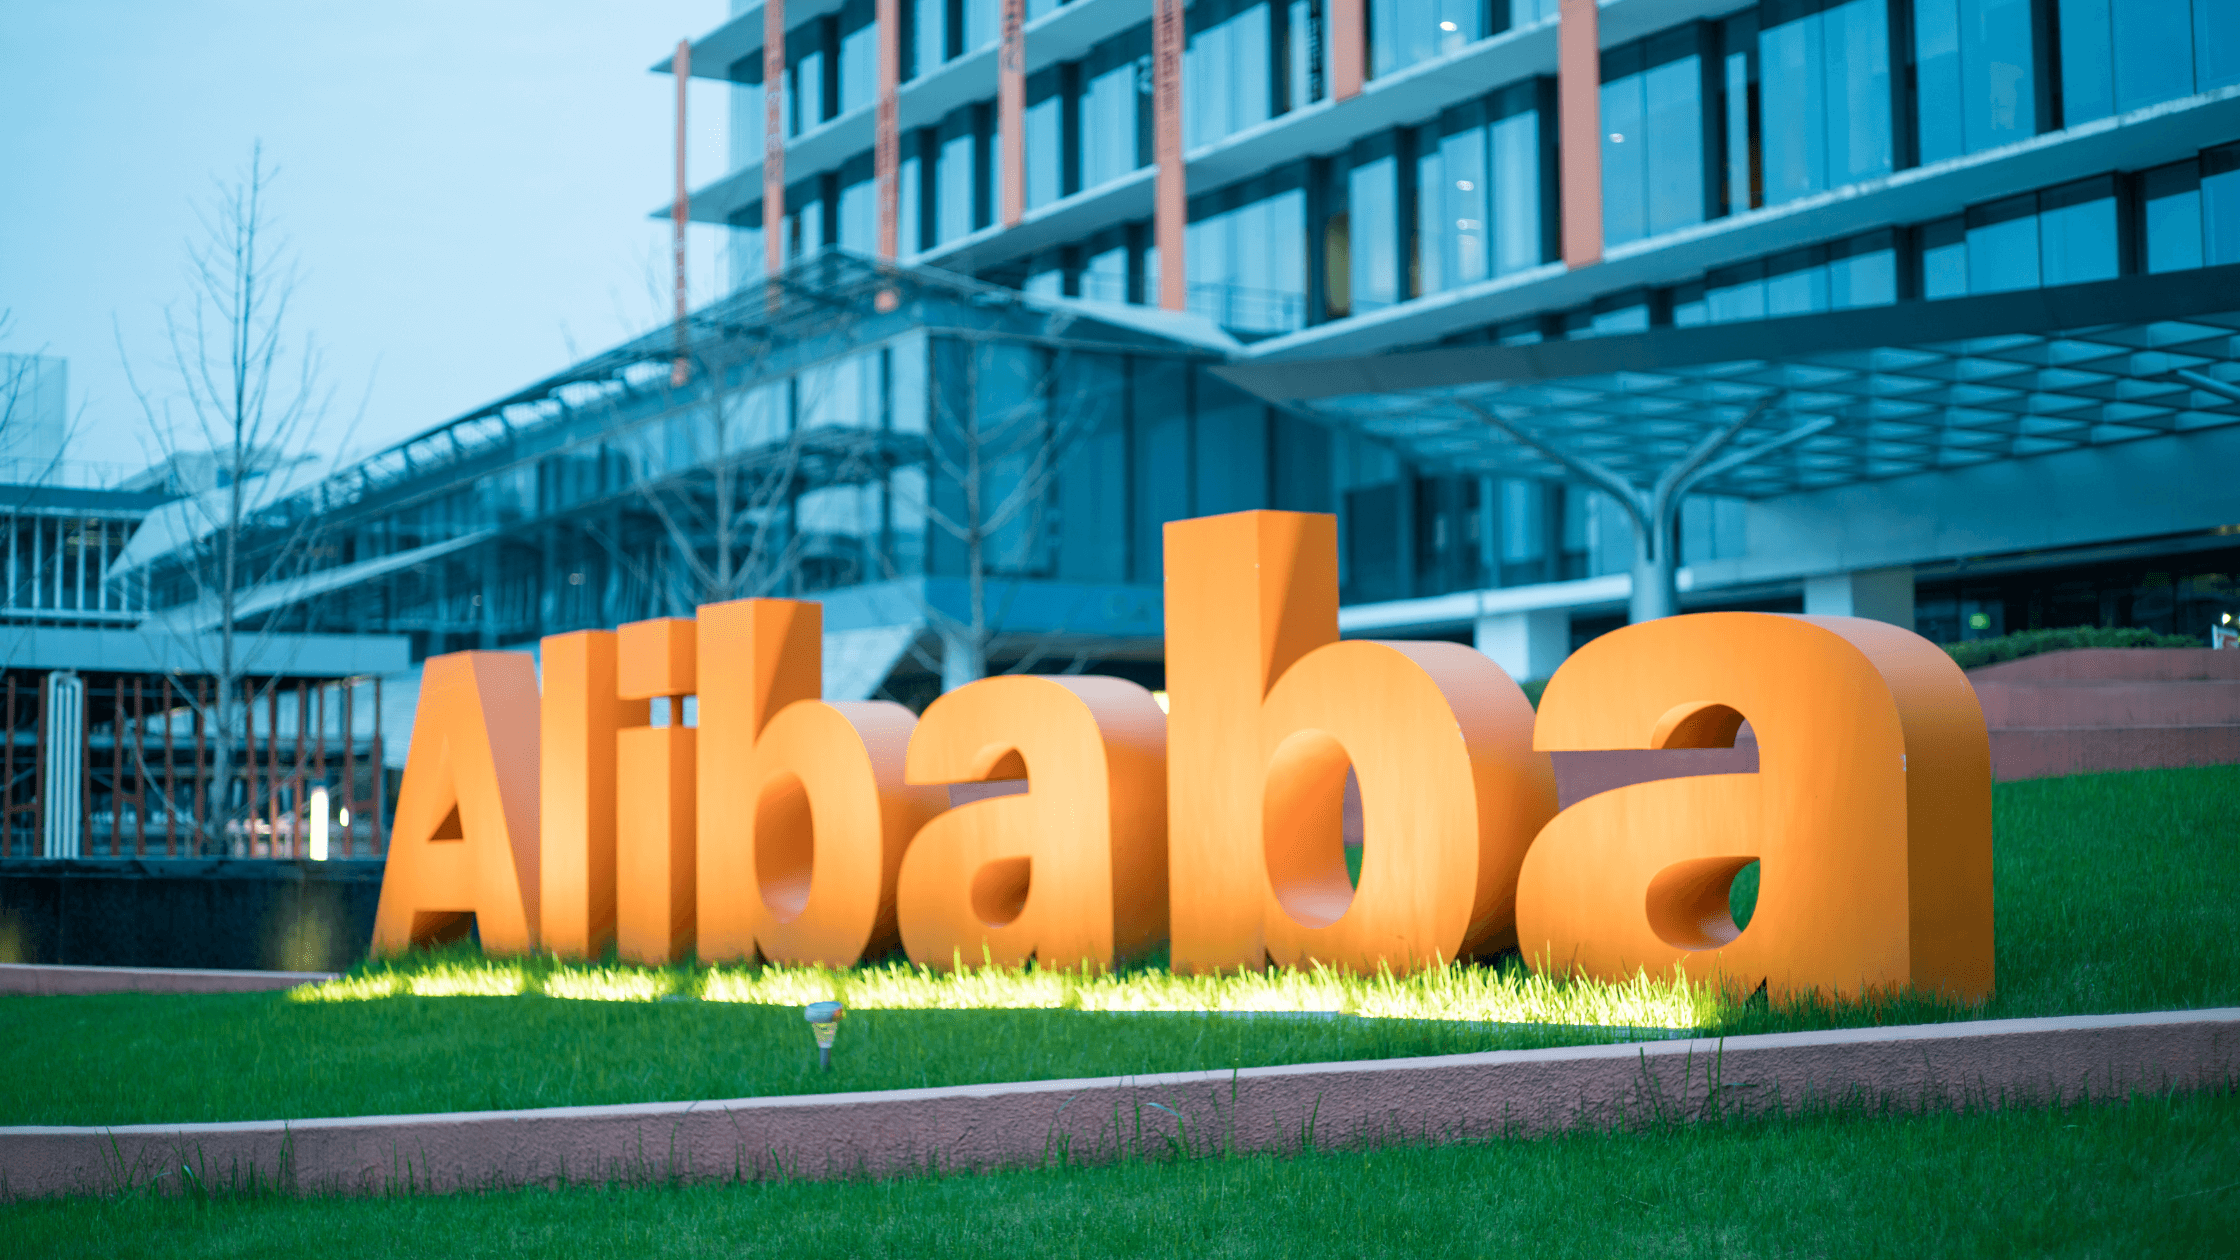 Alibaba Shares Soar Over 10% on Restructuring: What China Investors Need to Know